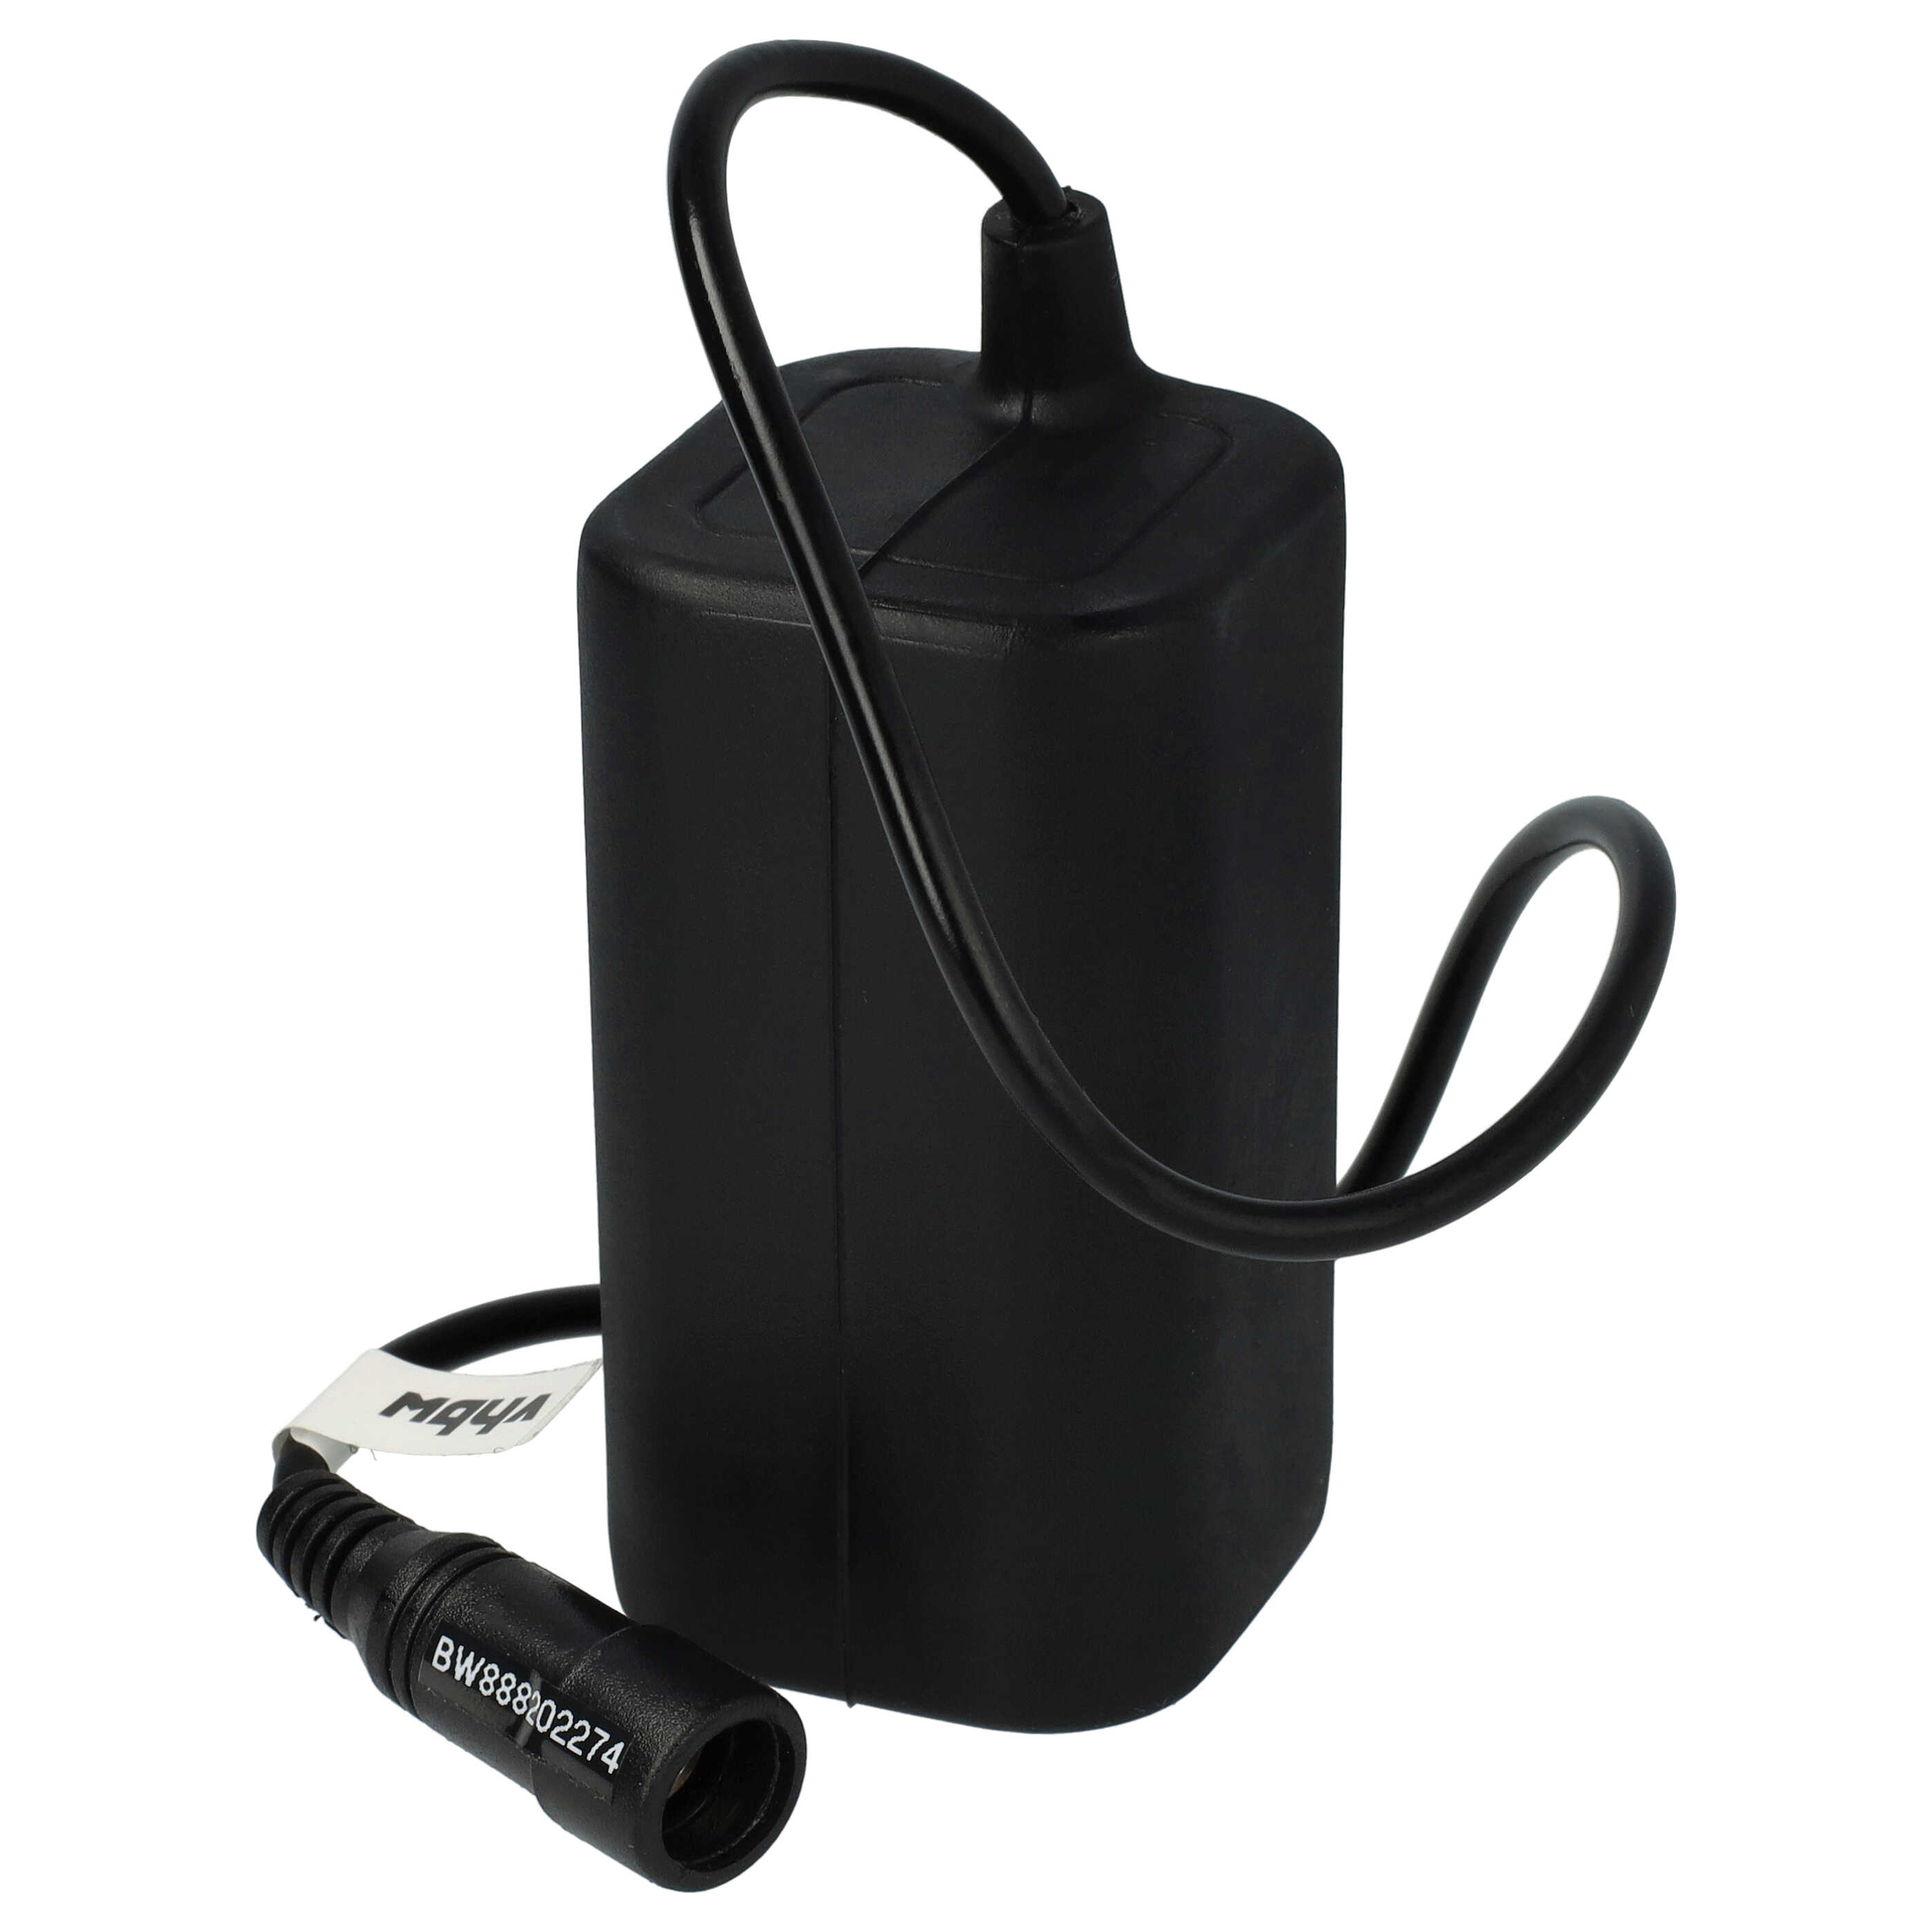 Li-Ion-battery pack- 5200mAh 8.4V water-repellent fabric + Charger - for bicycle lamp light